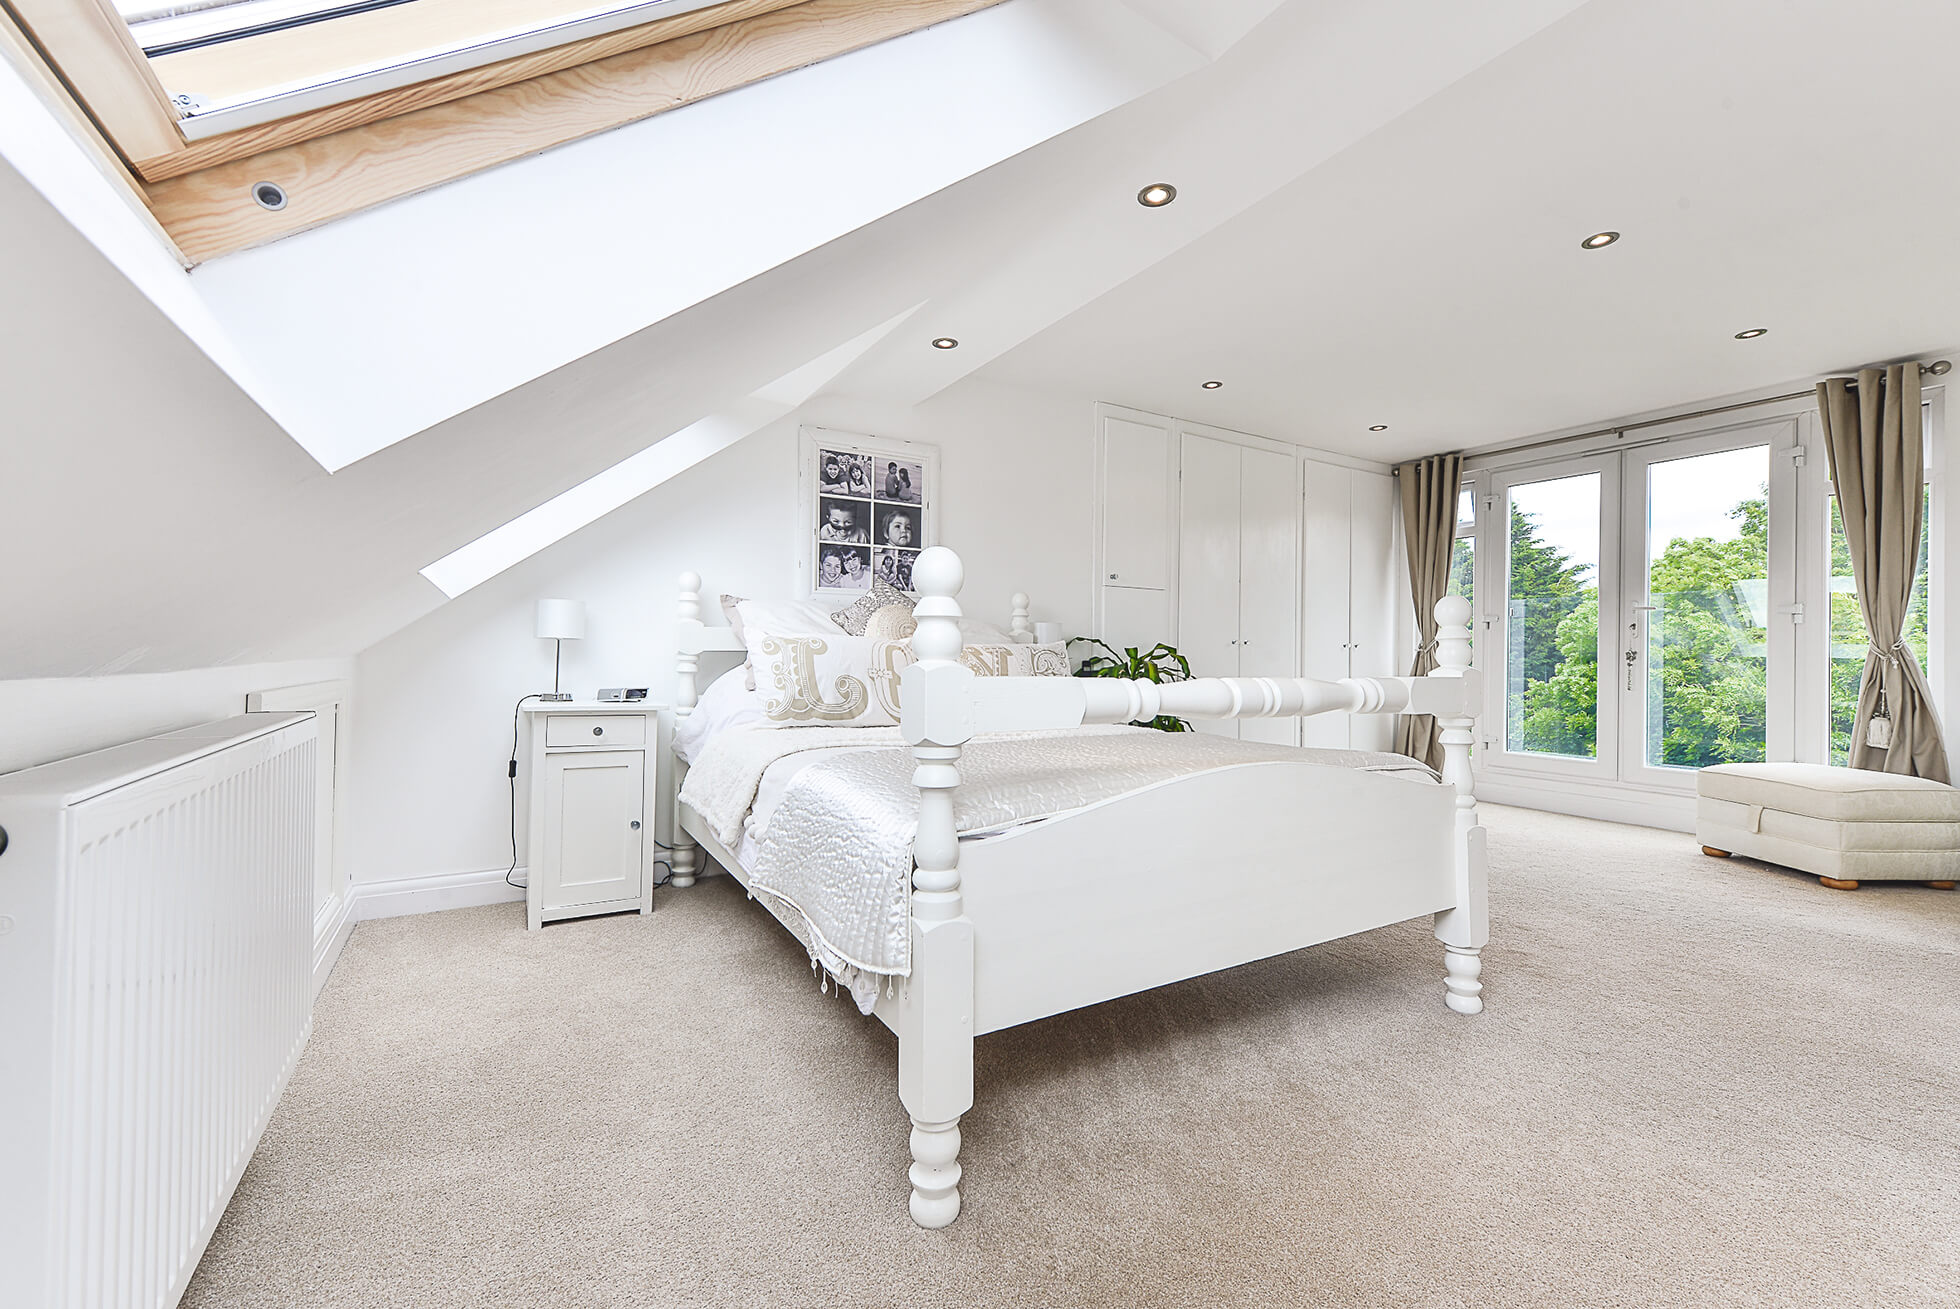 Do you have a question about converting your Loft in Little Gaddesden? Here are the most popular questions asked by our clients.